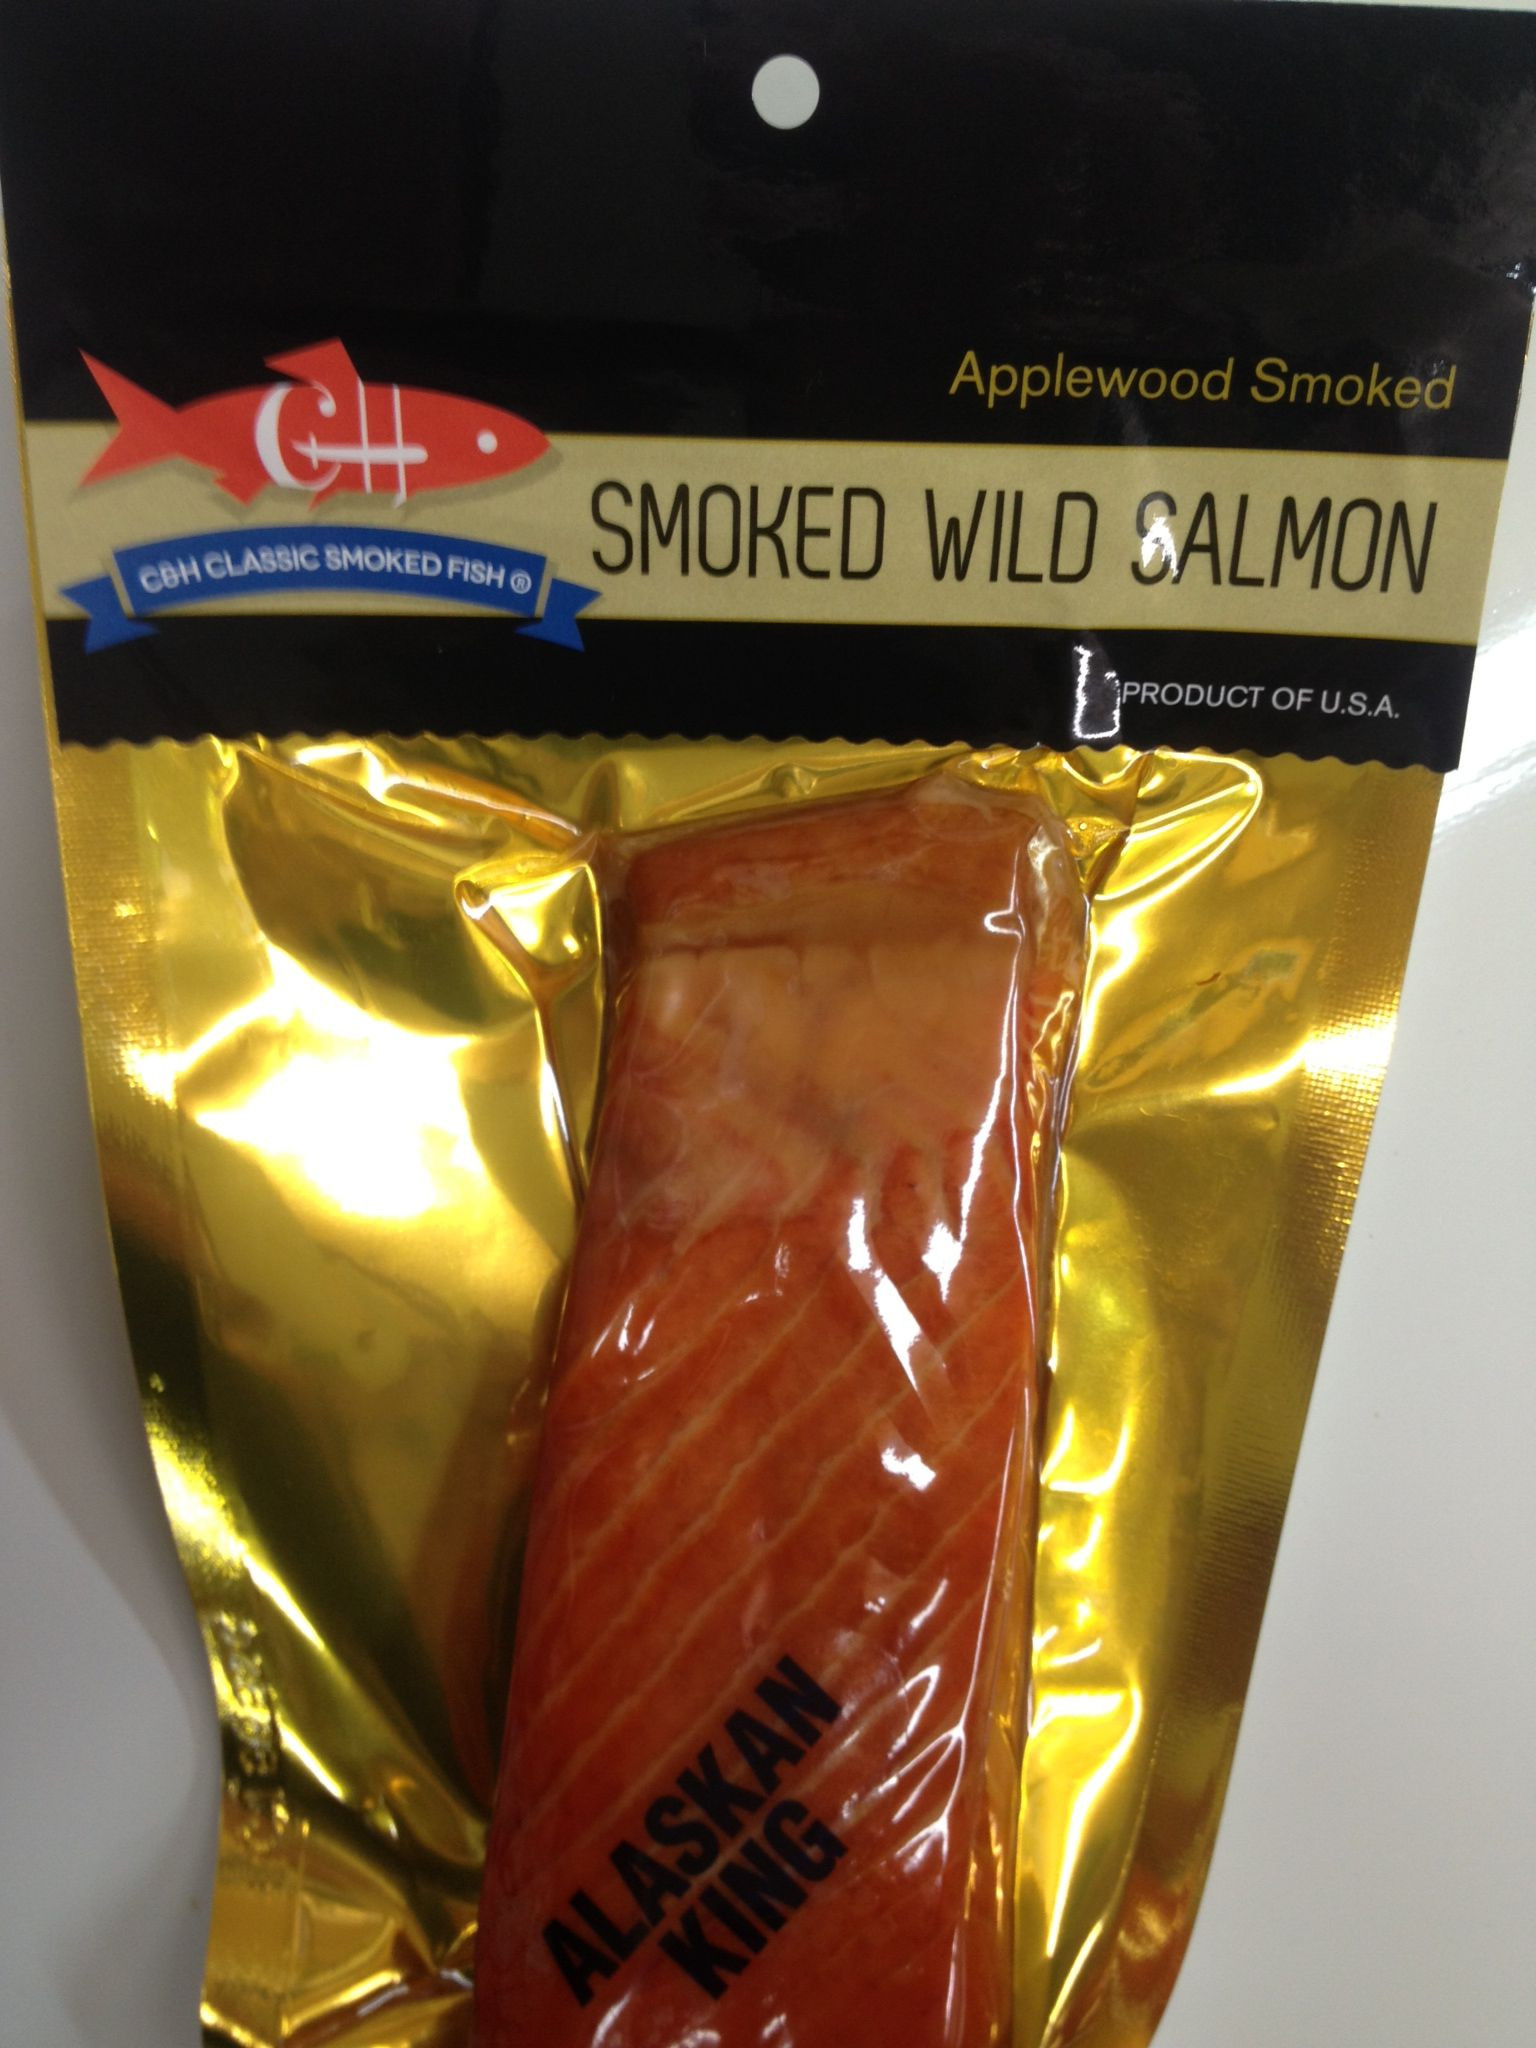 Best Smoked Salmon Seattle
 C & H Classic Smoked Fish is the Best Smoked Fish EVER